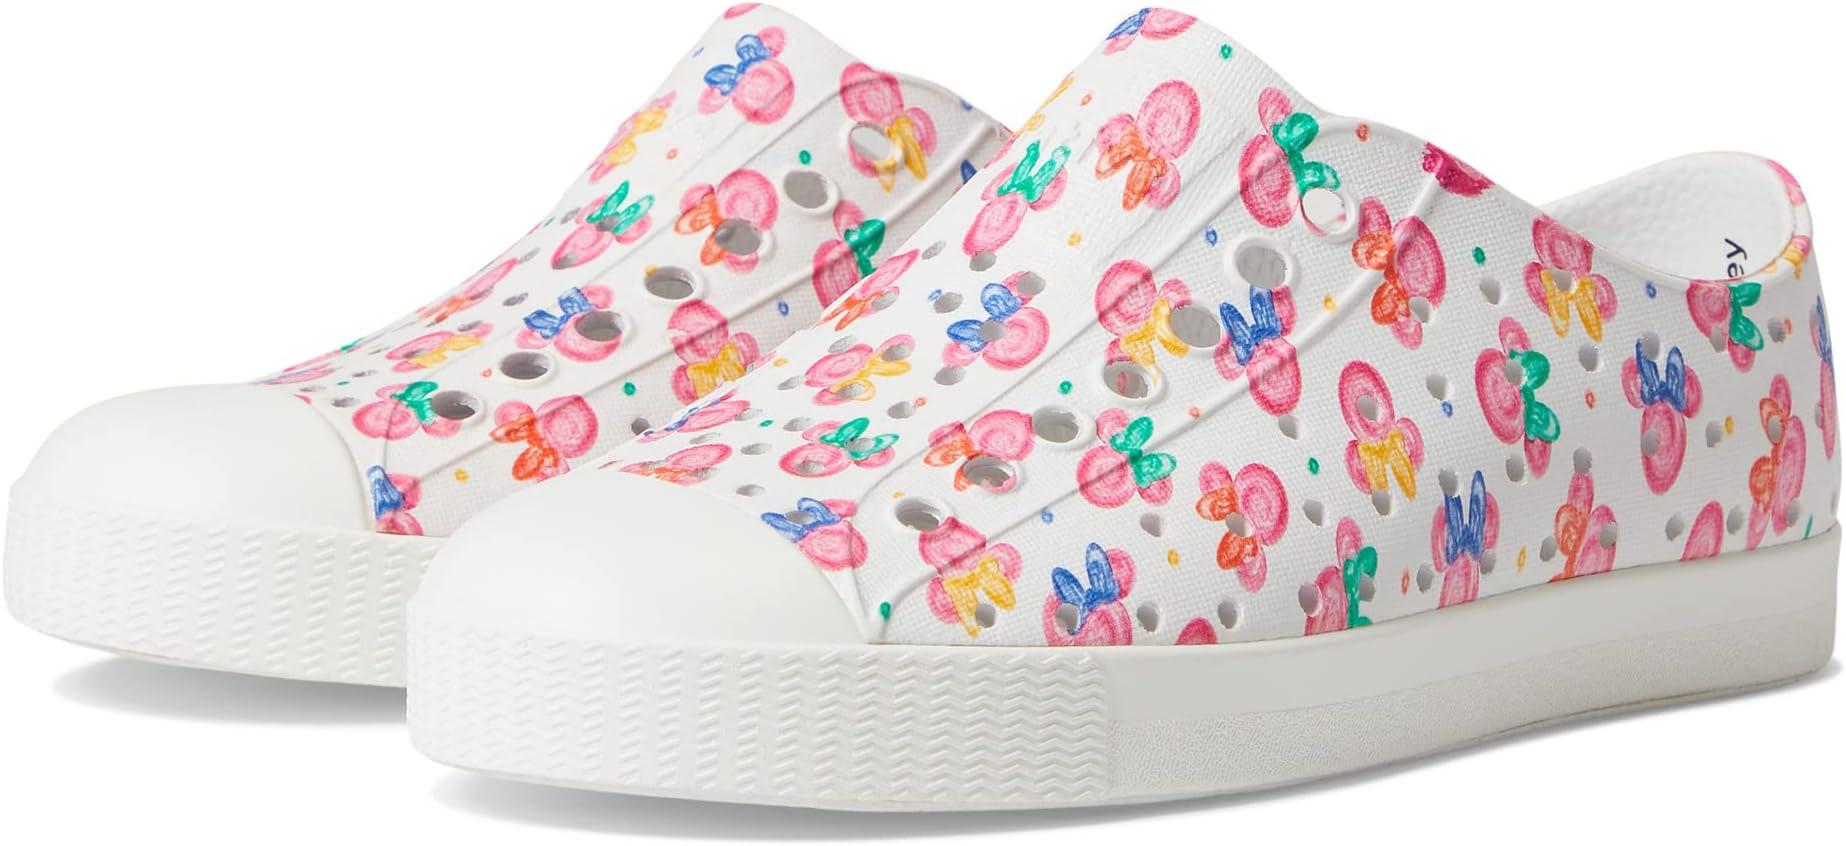 Кроссовки Jefferson Disney Print Native Shoes Kids, цвет Shell White/Shell White/Minnie Paint Drops All Over Print 2021 spring white shoes female students running shoes increase breathable leisure all match flat bottomed vulcanized shoes